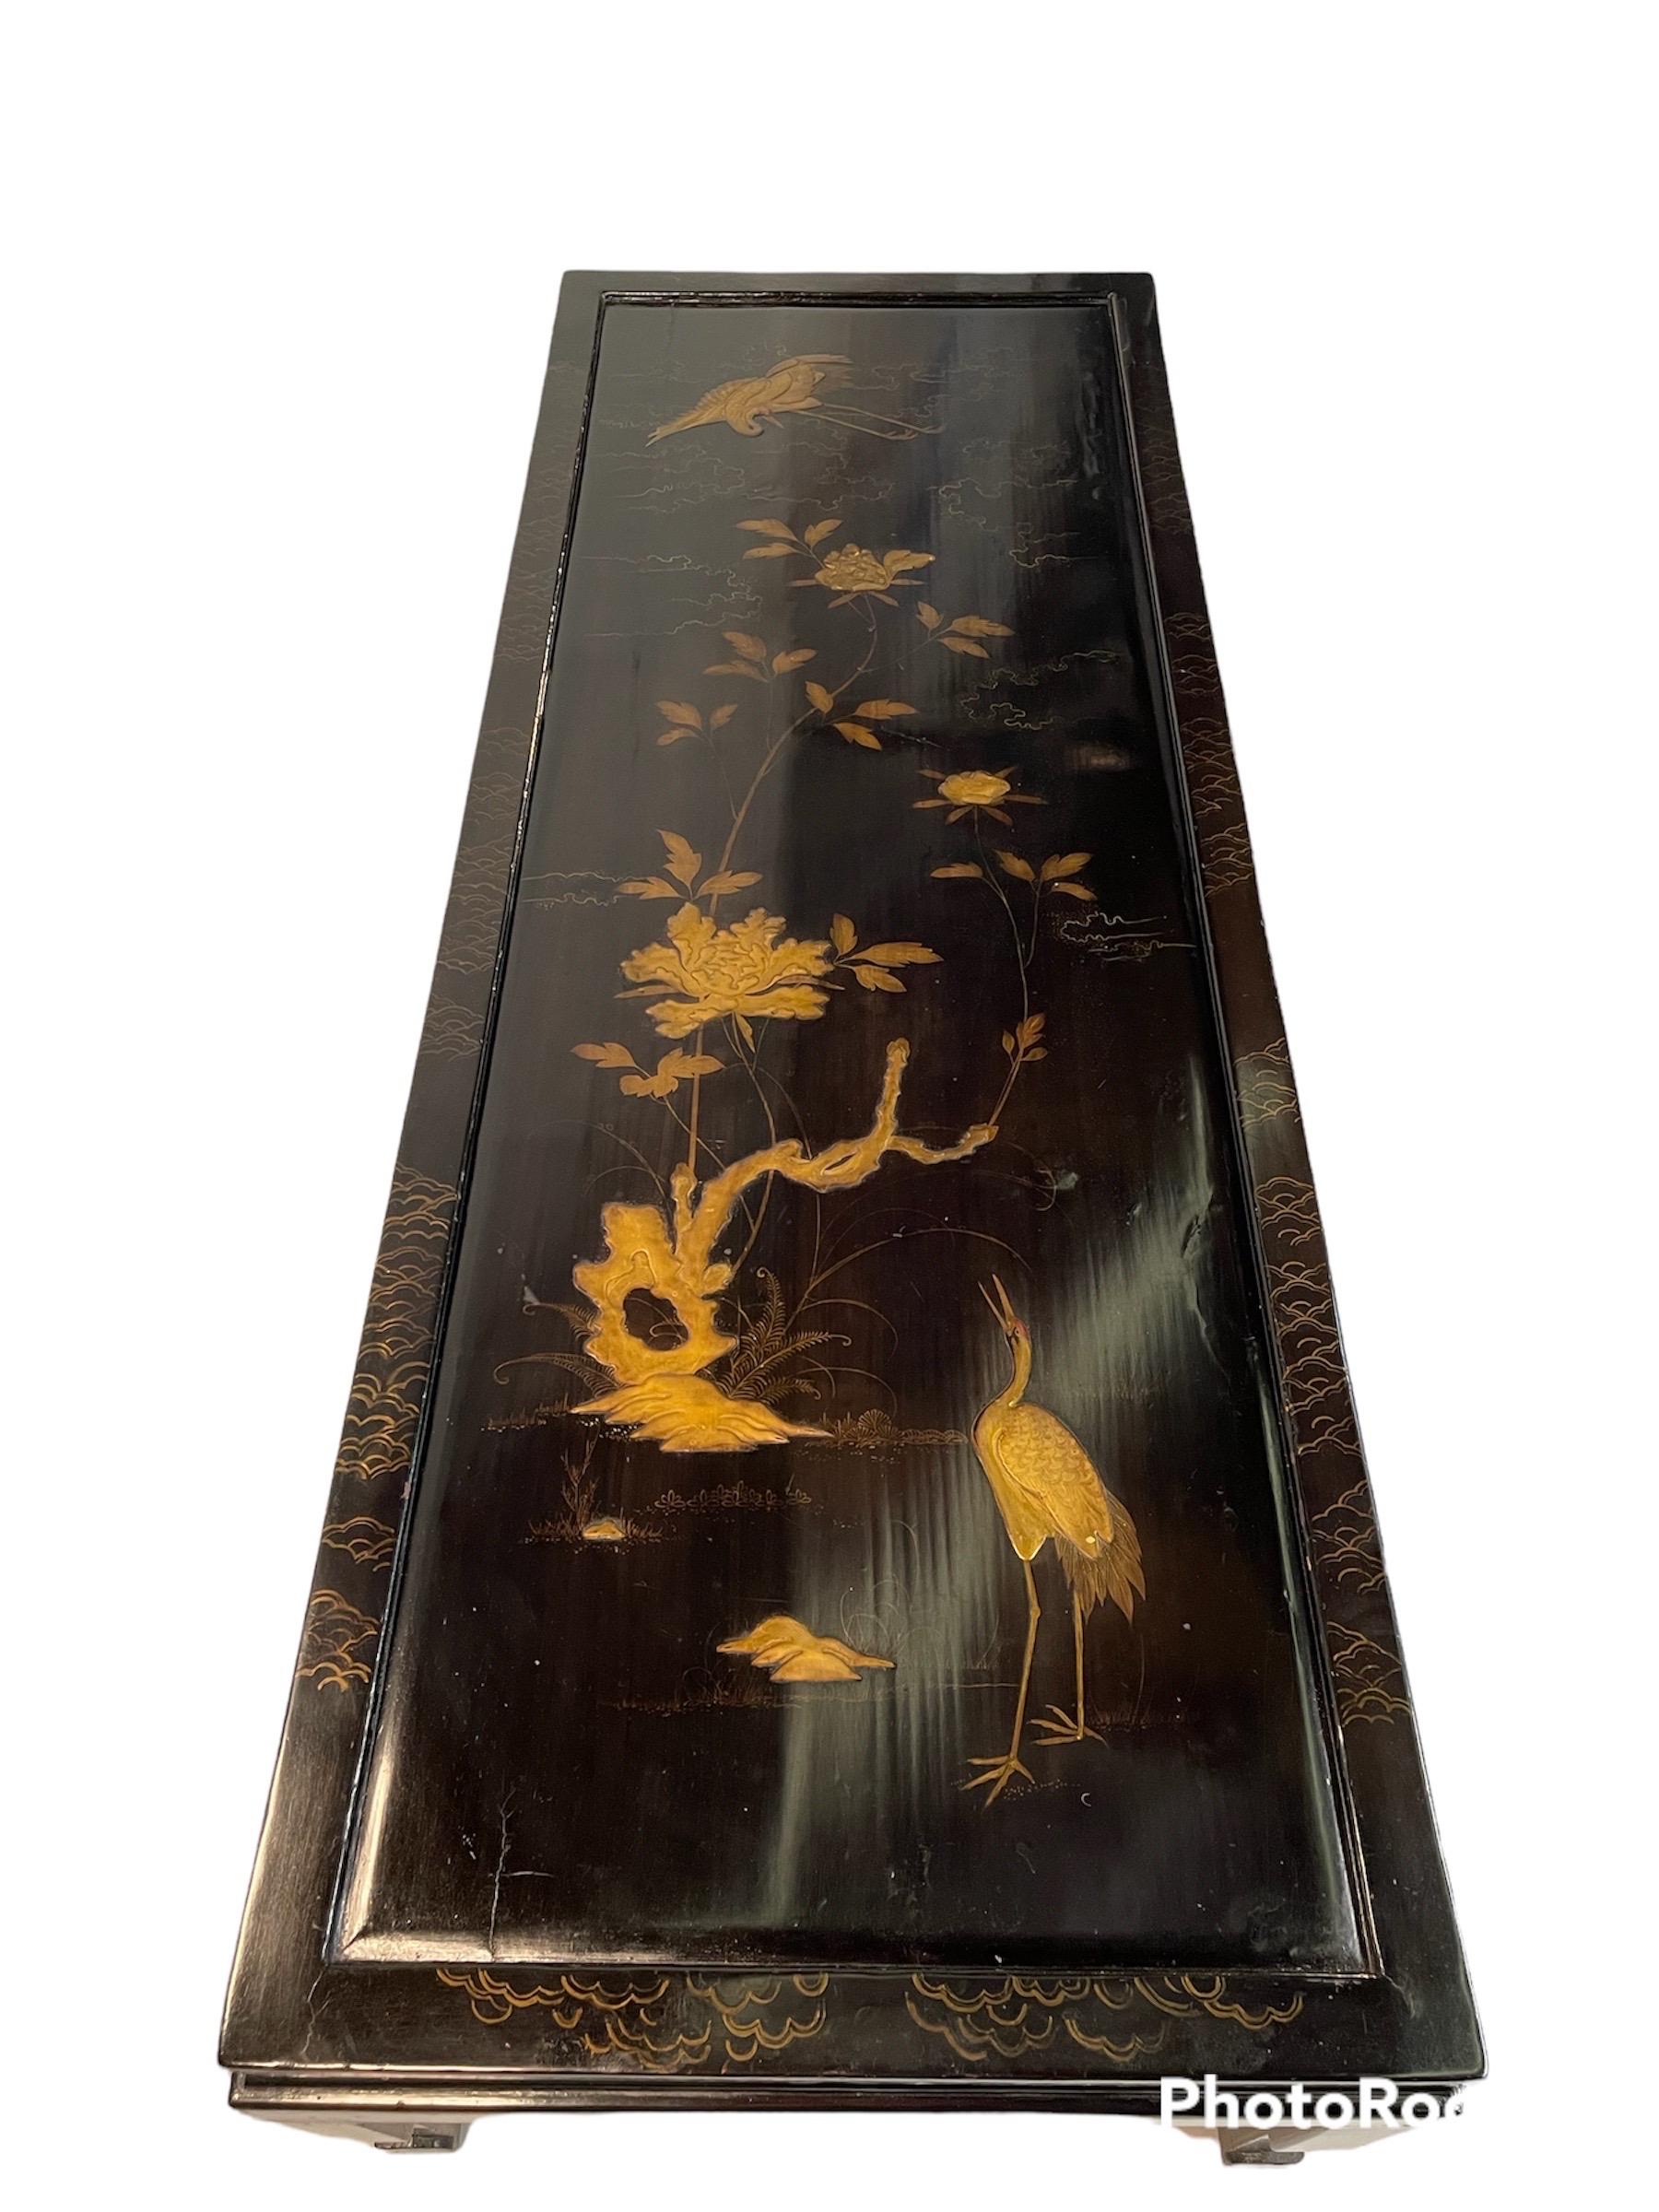 Exquisite 19th century Japanese lacquer & gilt panel mounted on a later ebonized and gilt decorated frame.